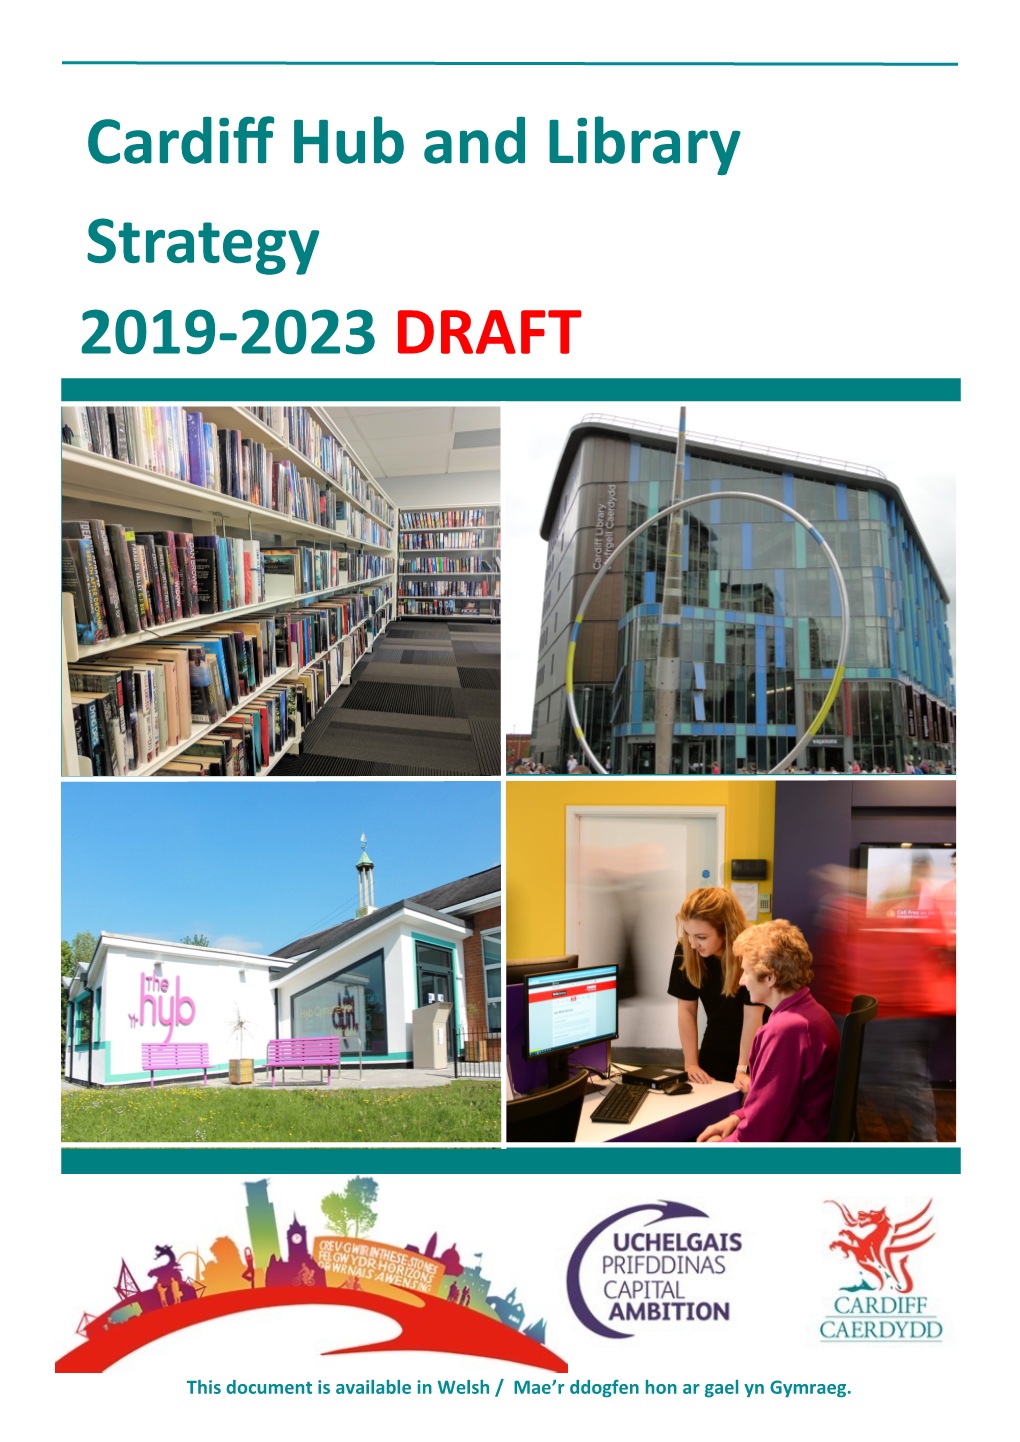 Cardiff Hub and Library Strategy 2019-2023 DRAFT